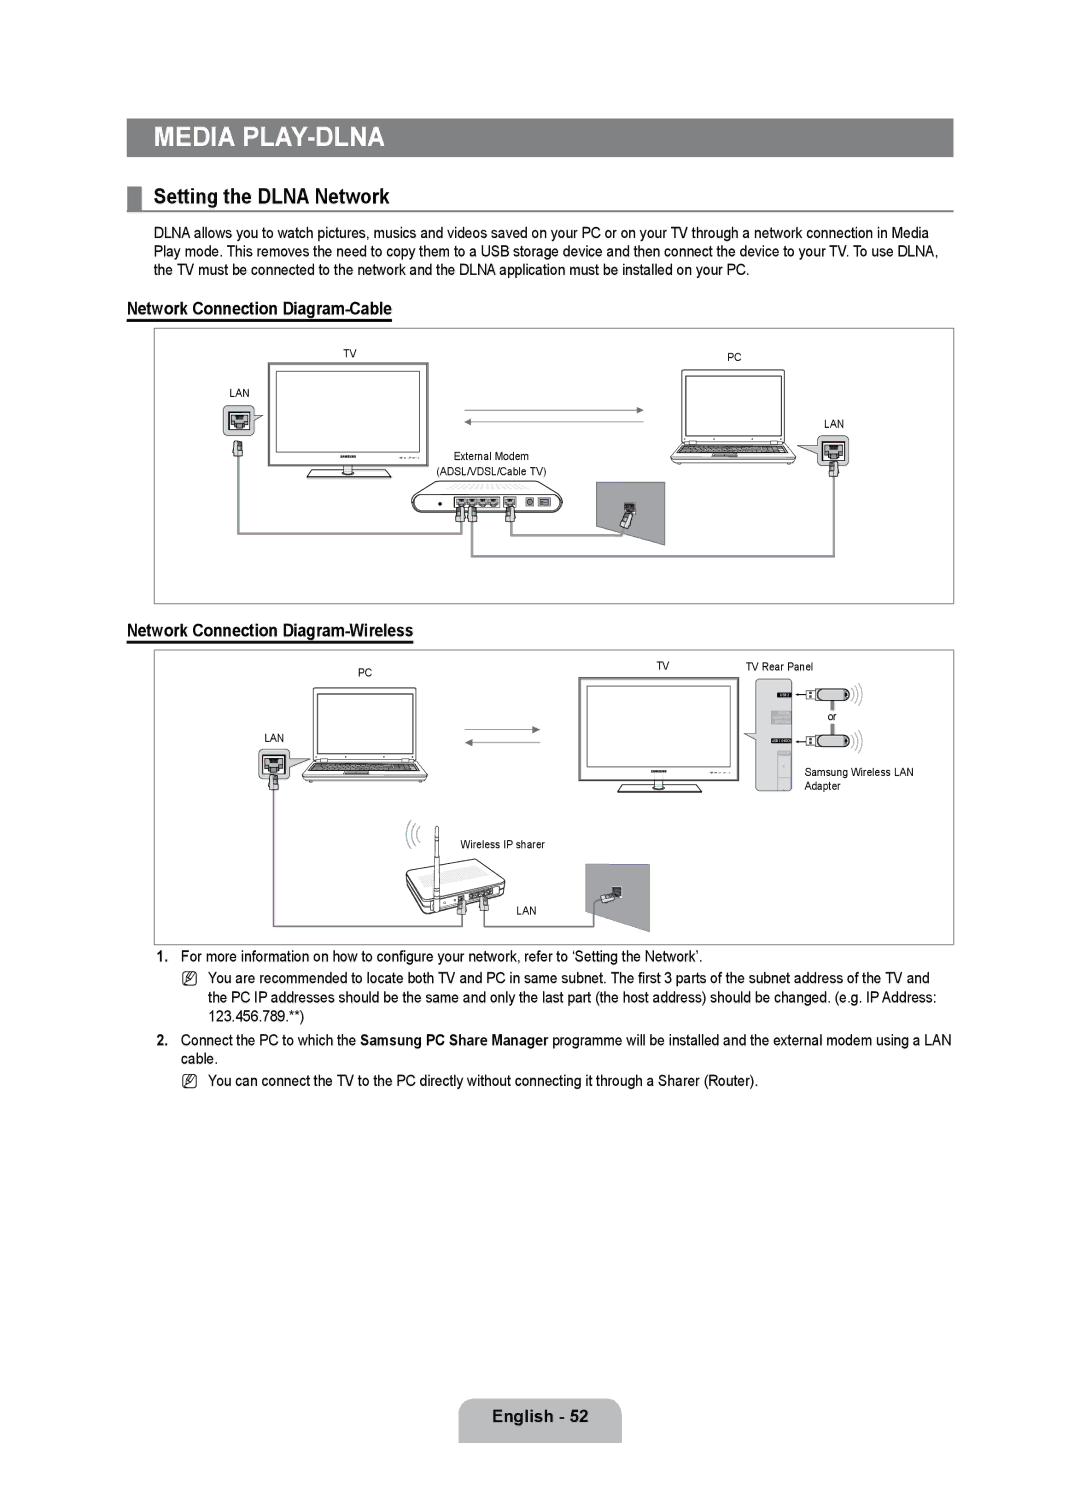 Samsung UE46B7000WWXUA, UE40B7020WWXUA manual Media Play-DLNA, Setting the Dlna Network, Network Connection Diagram-Cable 